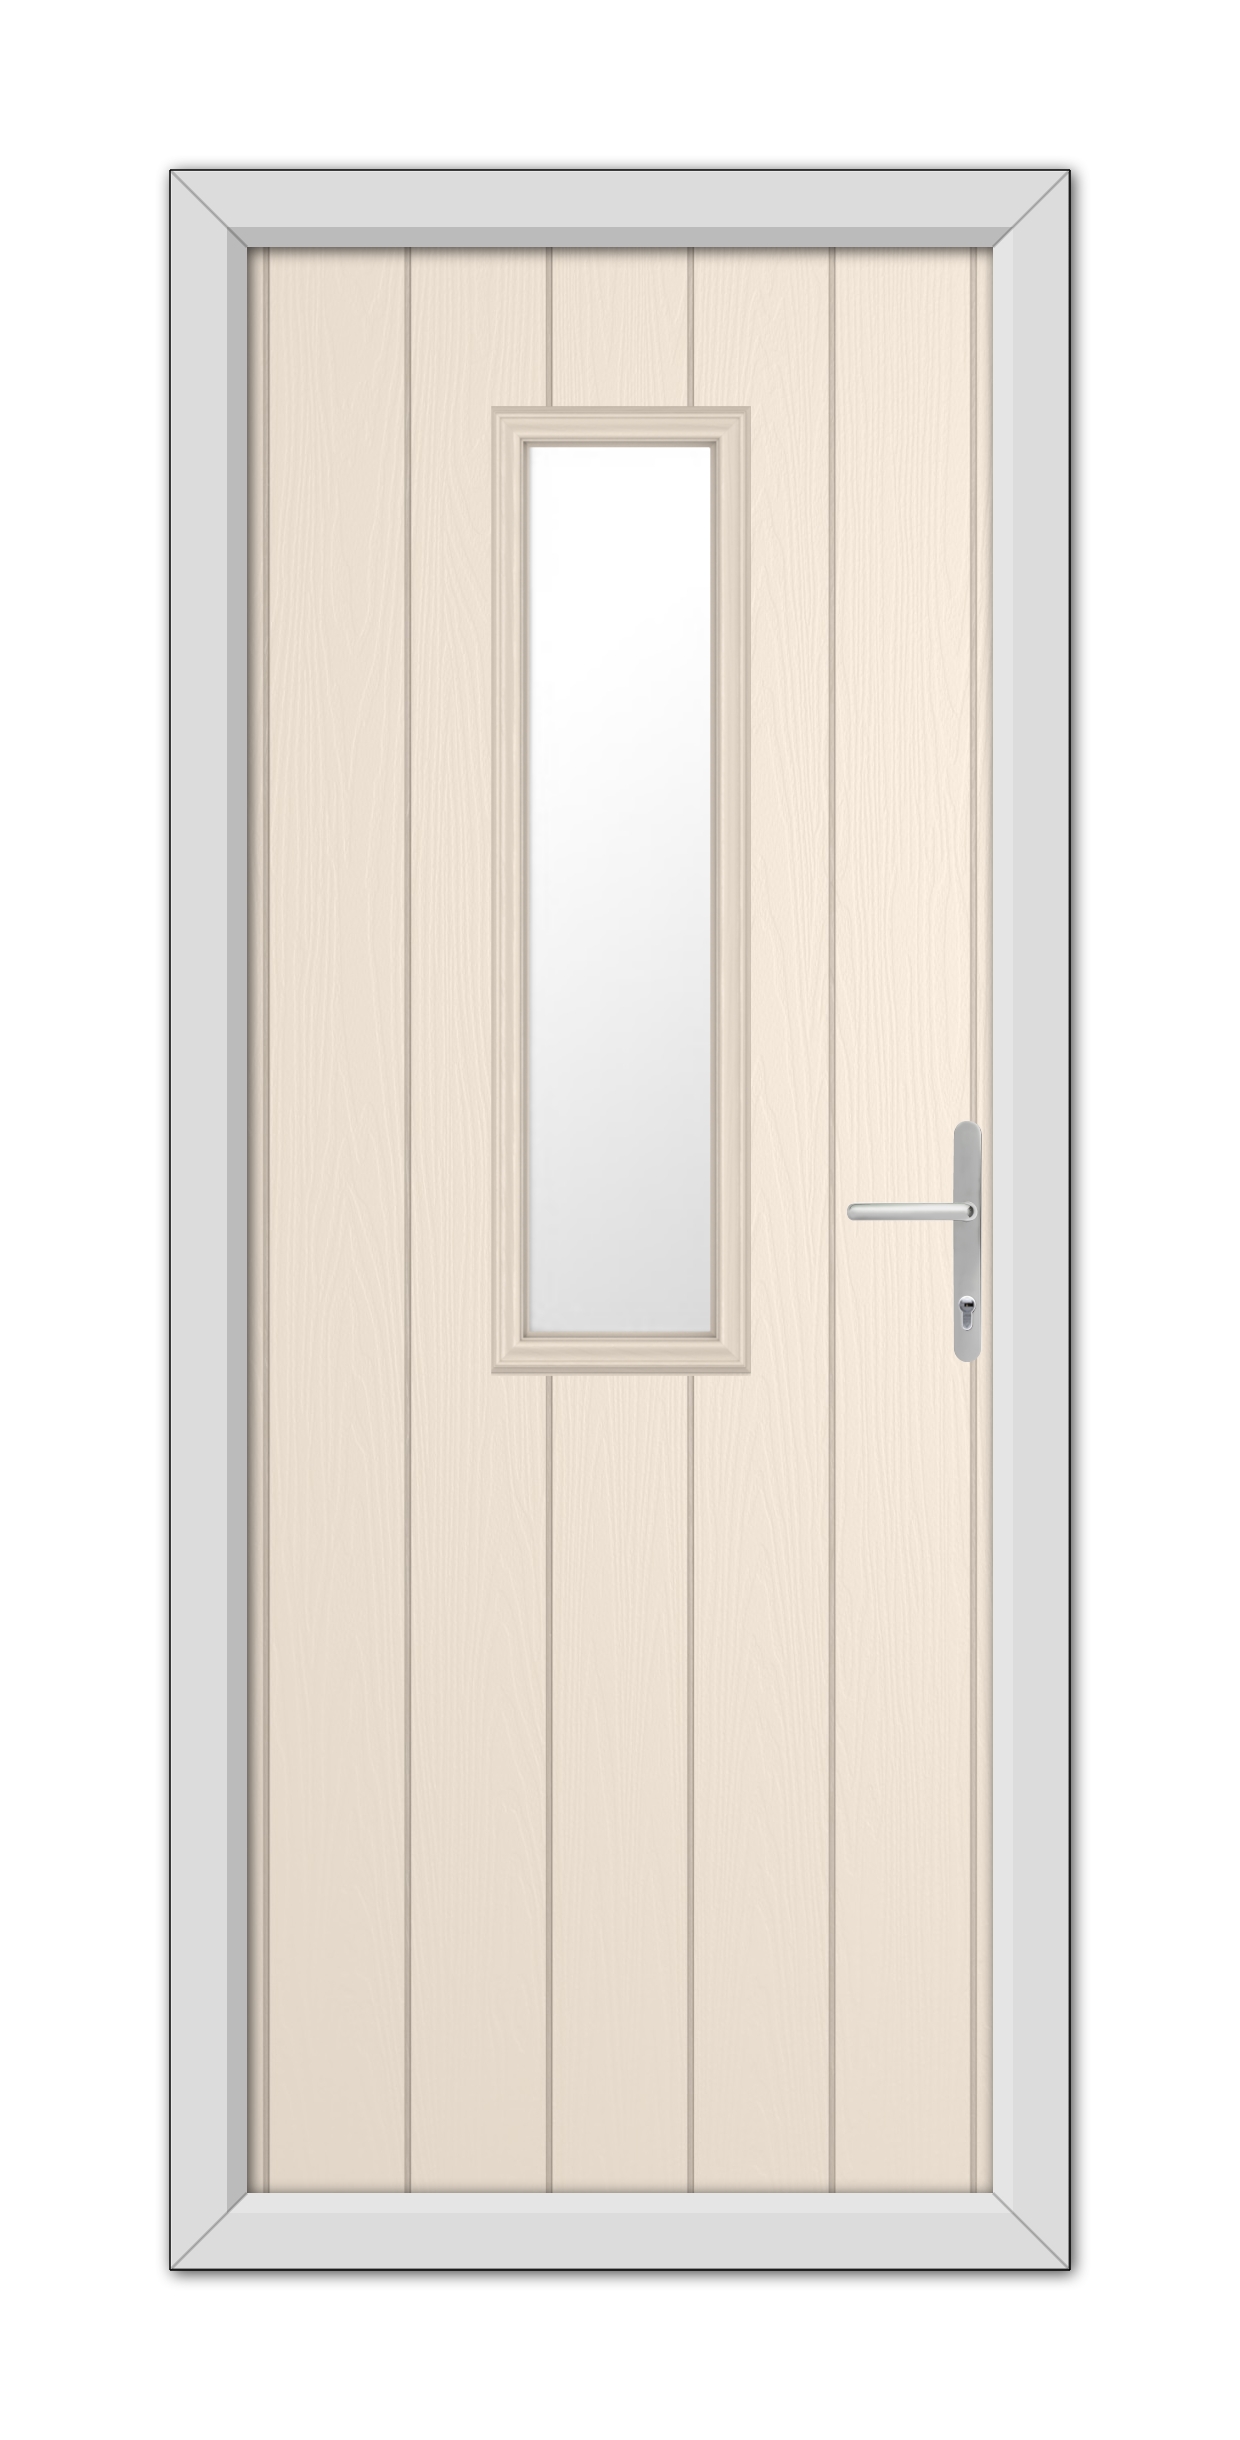 A modern Cream Mowbray Composite Door 48mm Timber Core with a vertical glass panel and a metal handle, set within a gray frame.